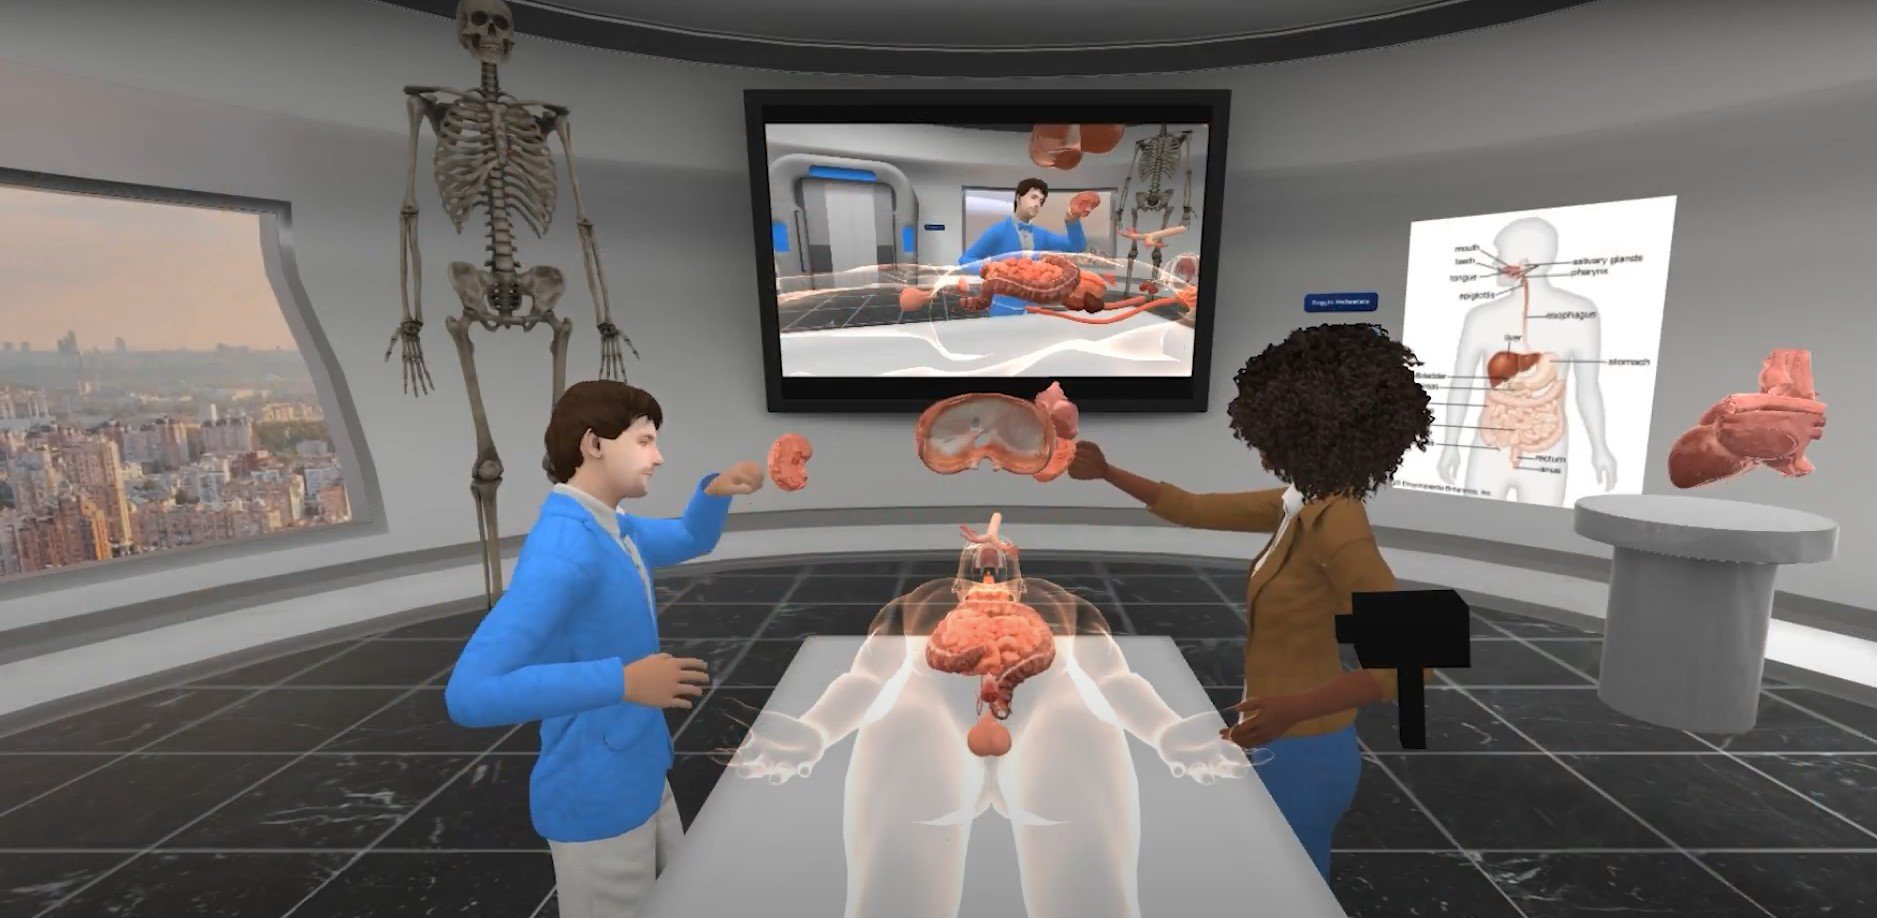 Two avatars are working over a digital cadaver in an anatomy class taught in the metaverse. 